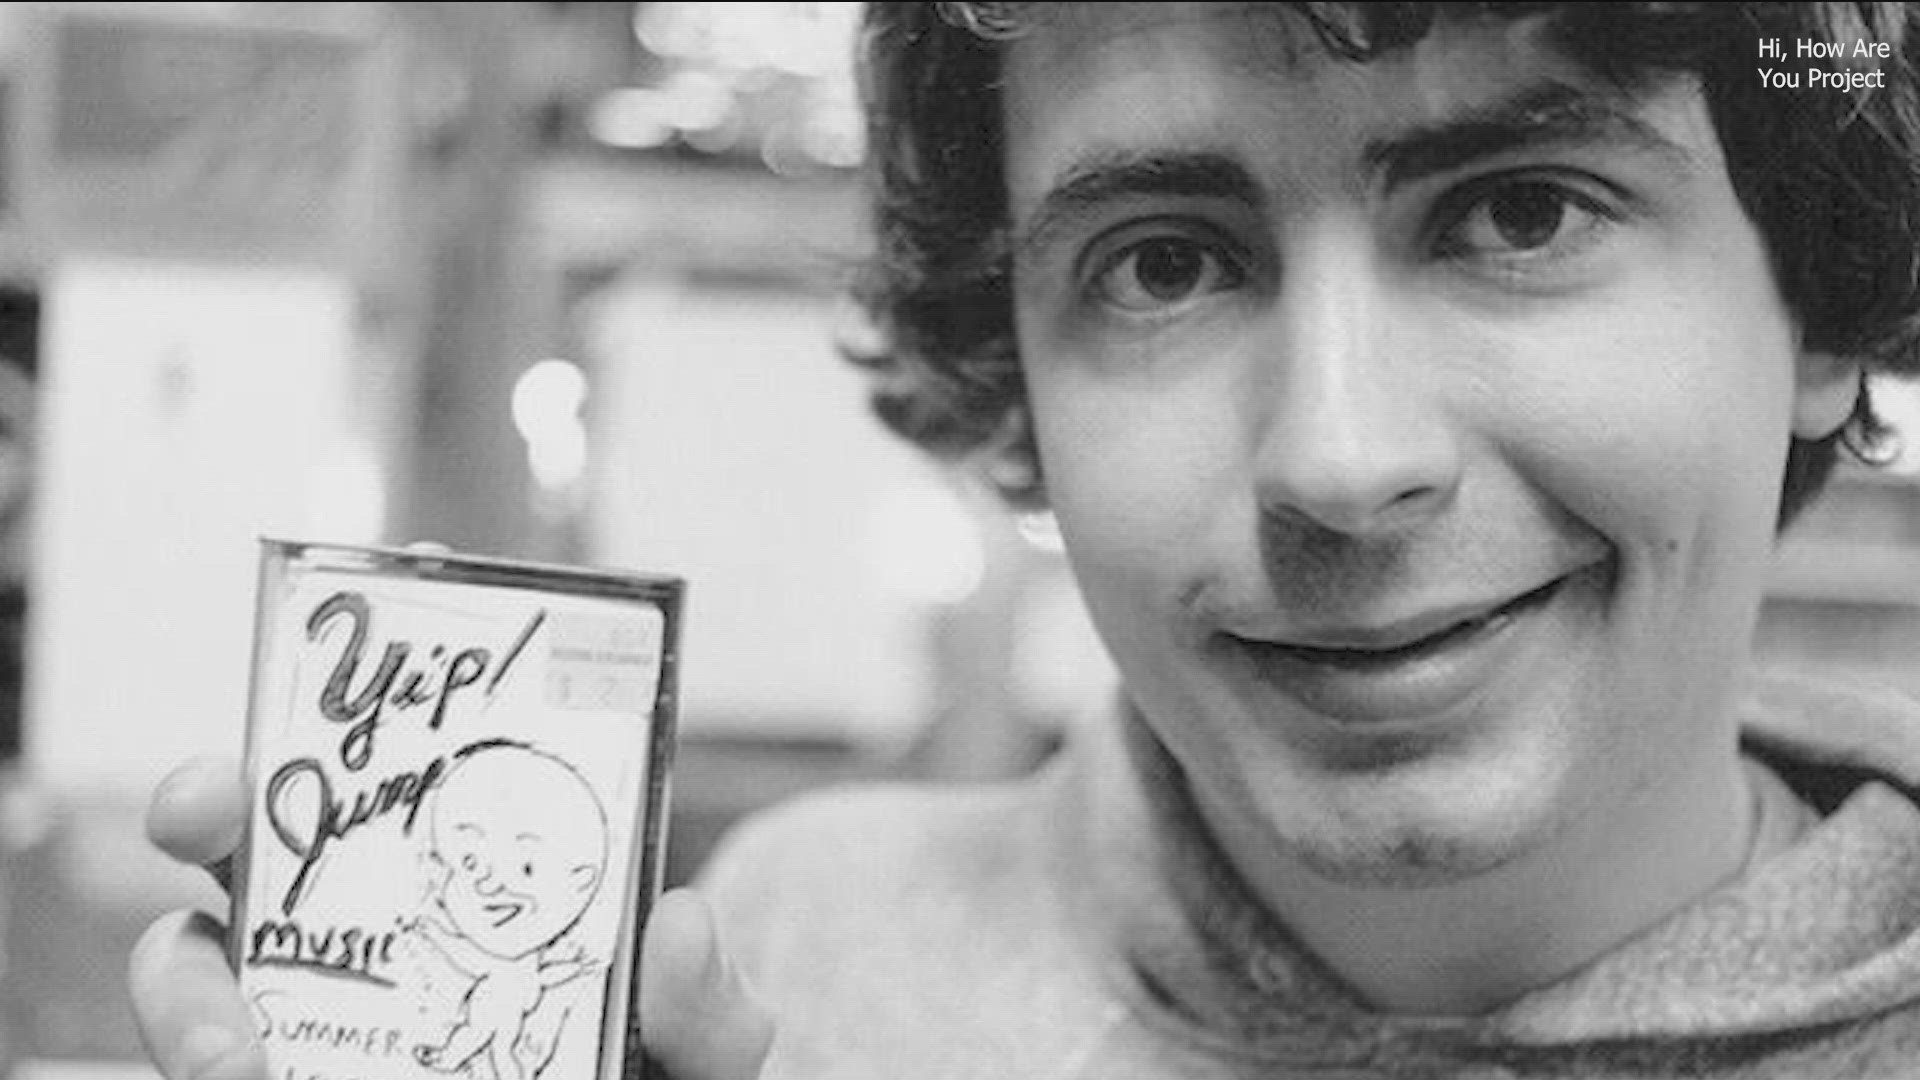 Jan. 22 is a day to celebrate the life of Daniel Johnston, a musician and artist known for creating the famous "Hi, How Are You" mural near UT's campus.